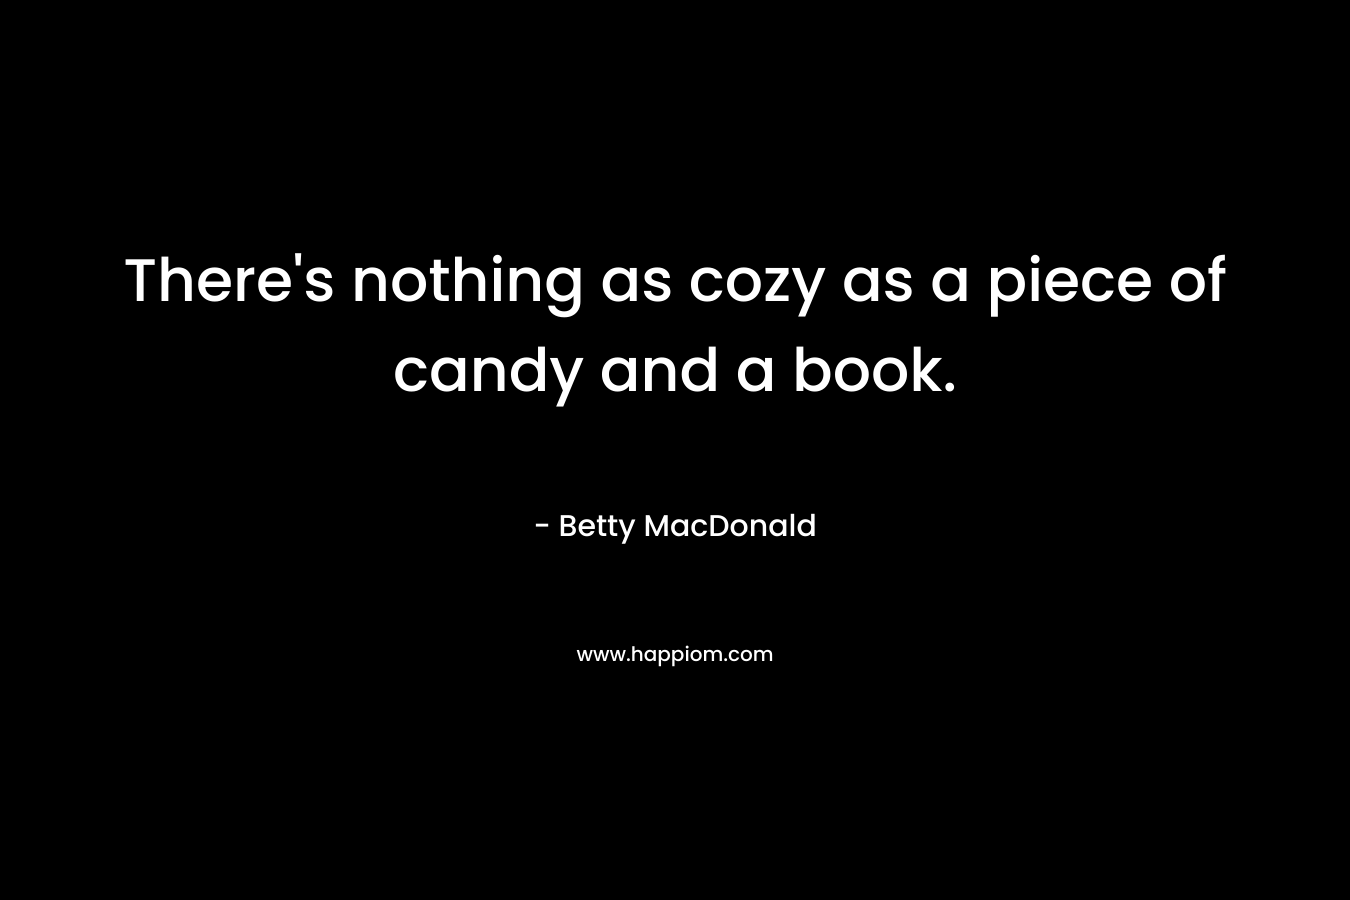 There’s nothing as cozy as a piece of candy and a book. – Betty MacDonald